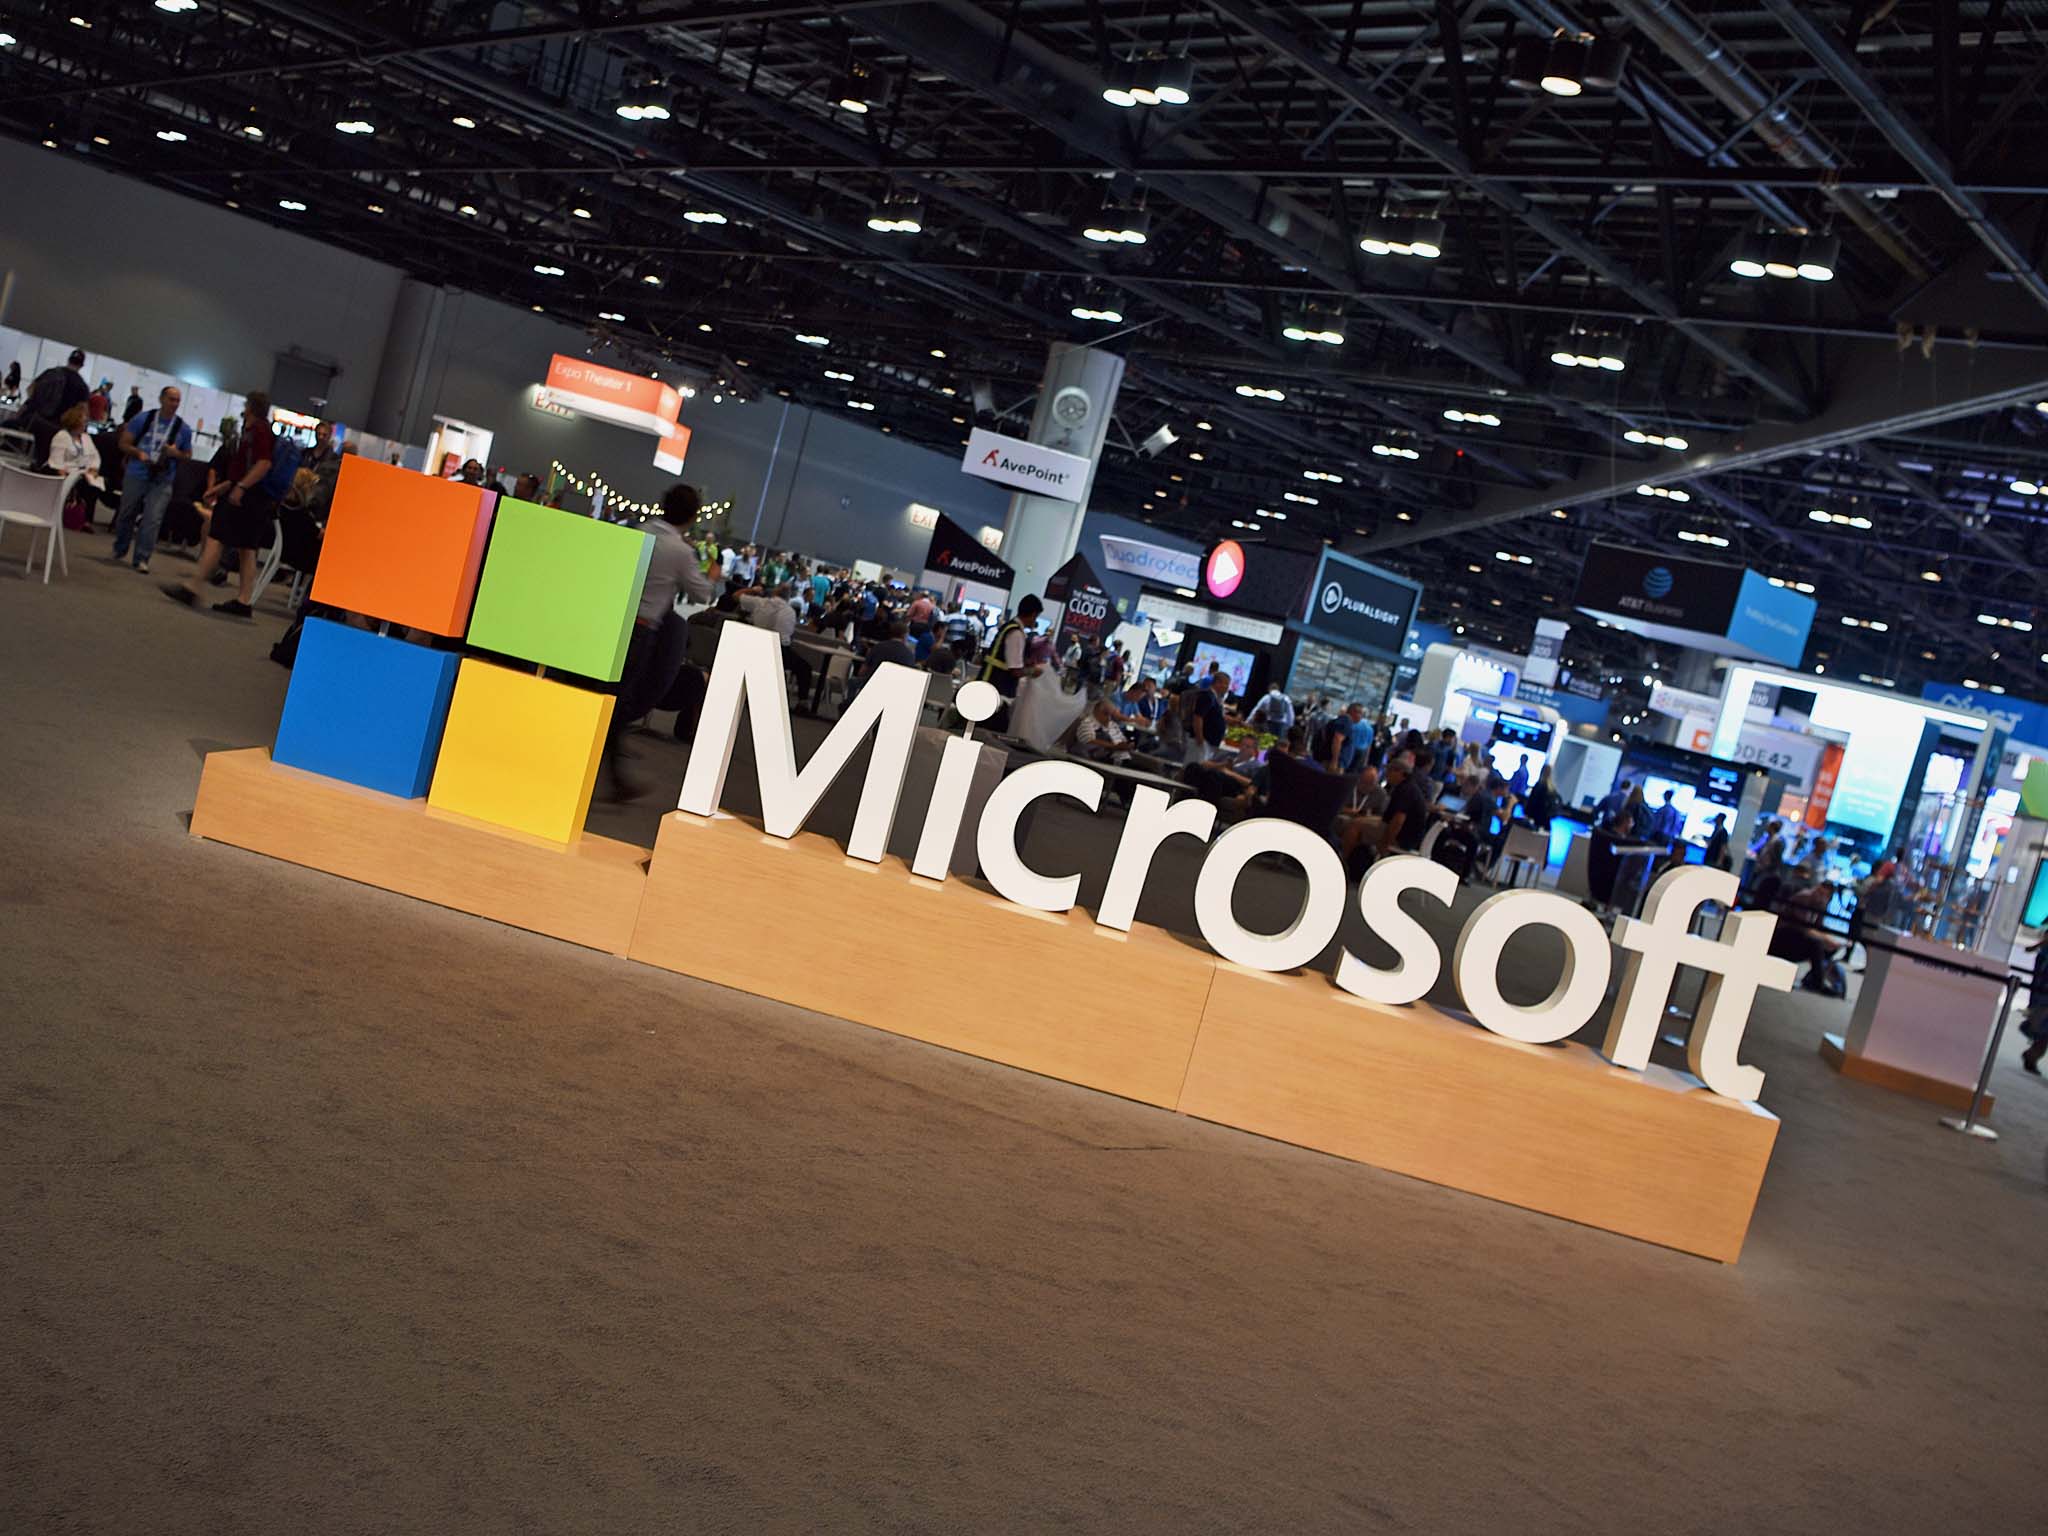 Microsoft caught up in bribery probe over software sales in Hungary